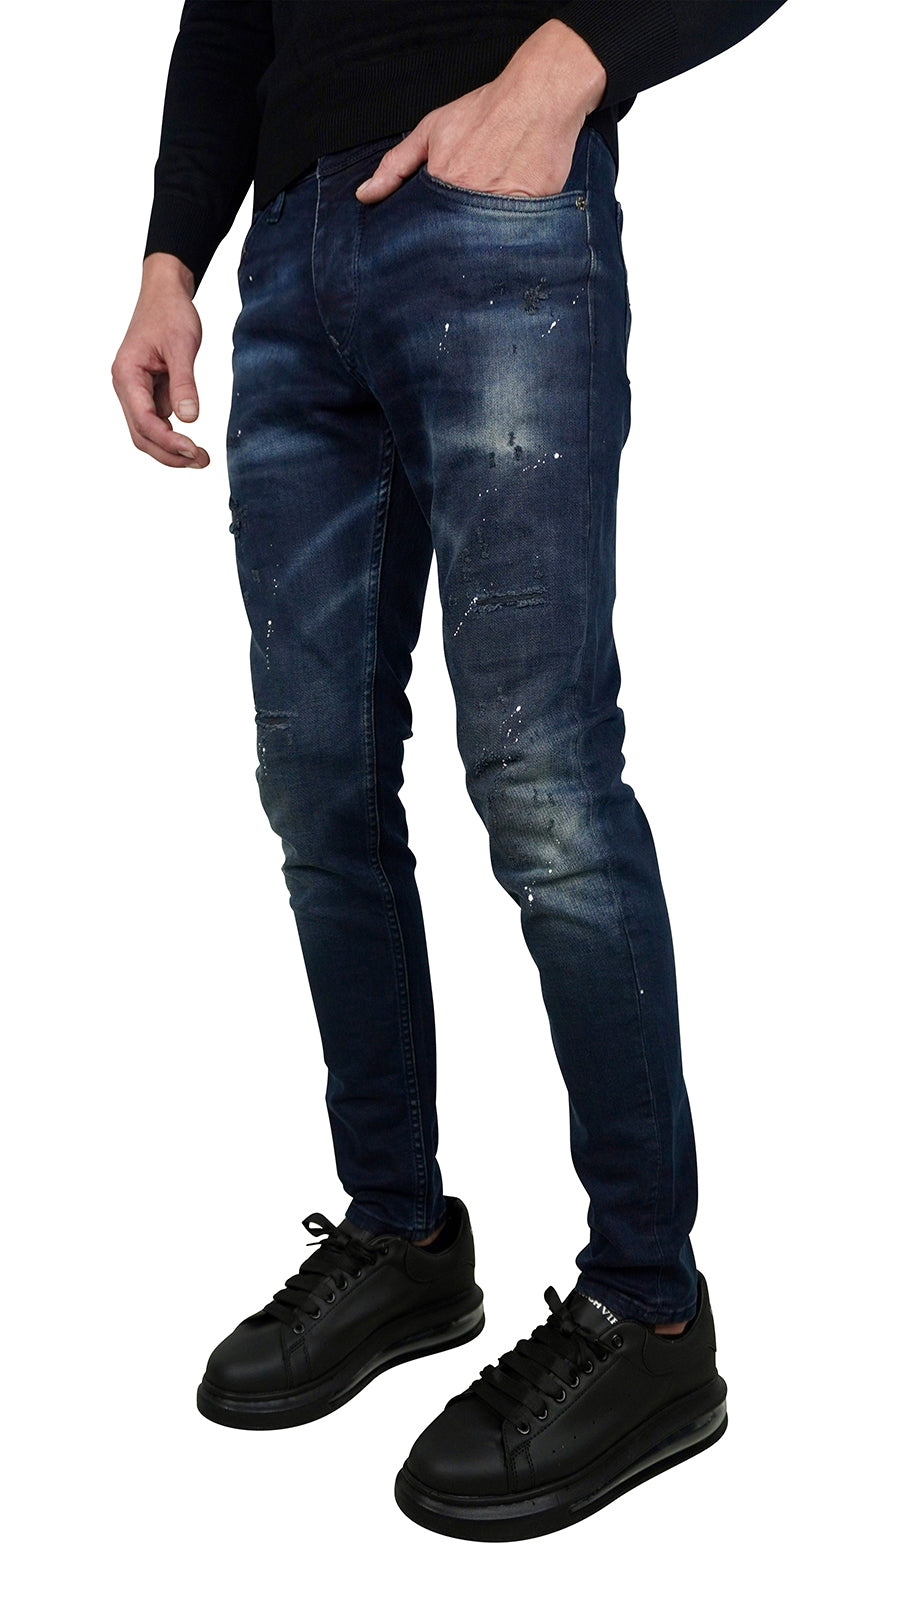 THE MIKES WHITE SPATTED JEANS - DARK BLUE